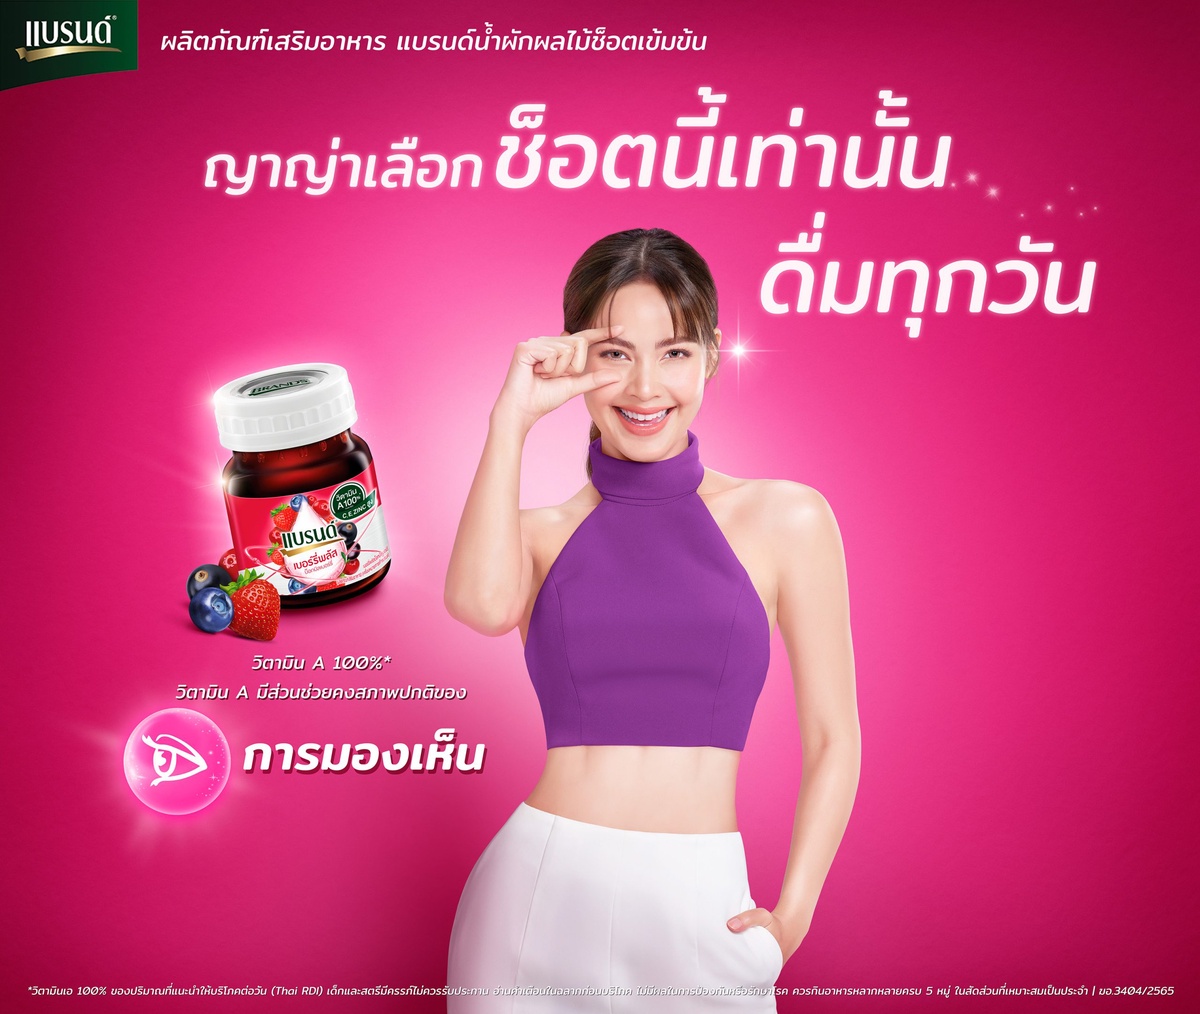 BRAND'S Fruit Essence launches 'Challenge to try 6-day' campaign and introduces its new presenter 'Yaya Urassaya'